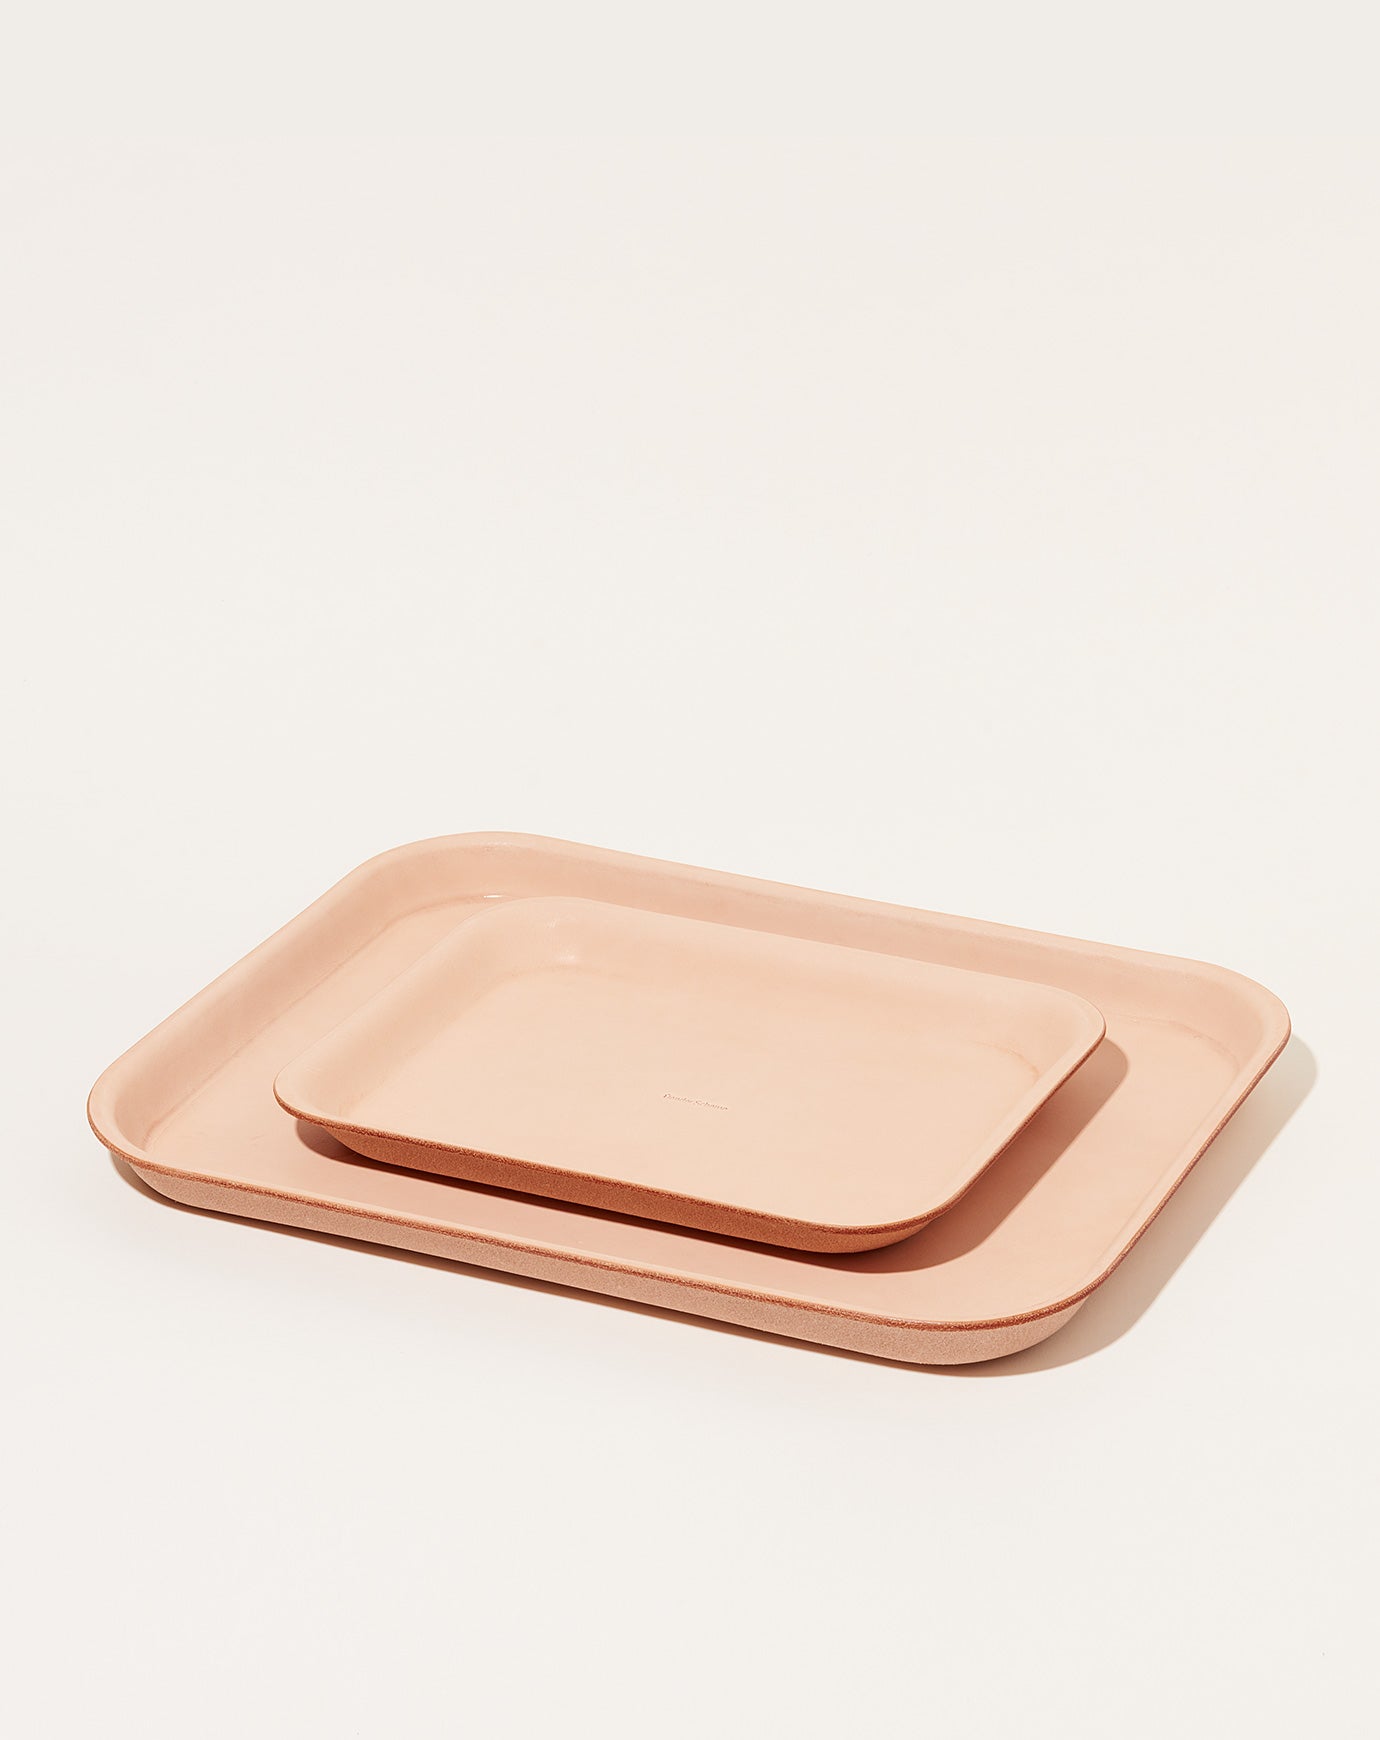 Hender Scheme Leather Tray M in Natural